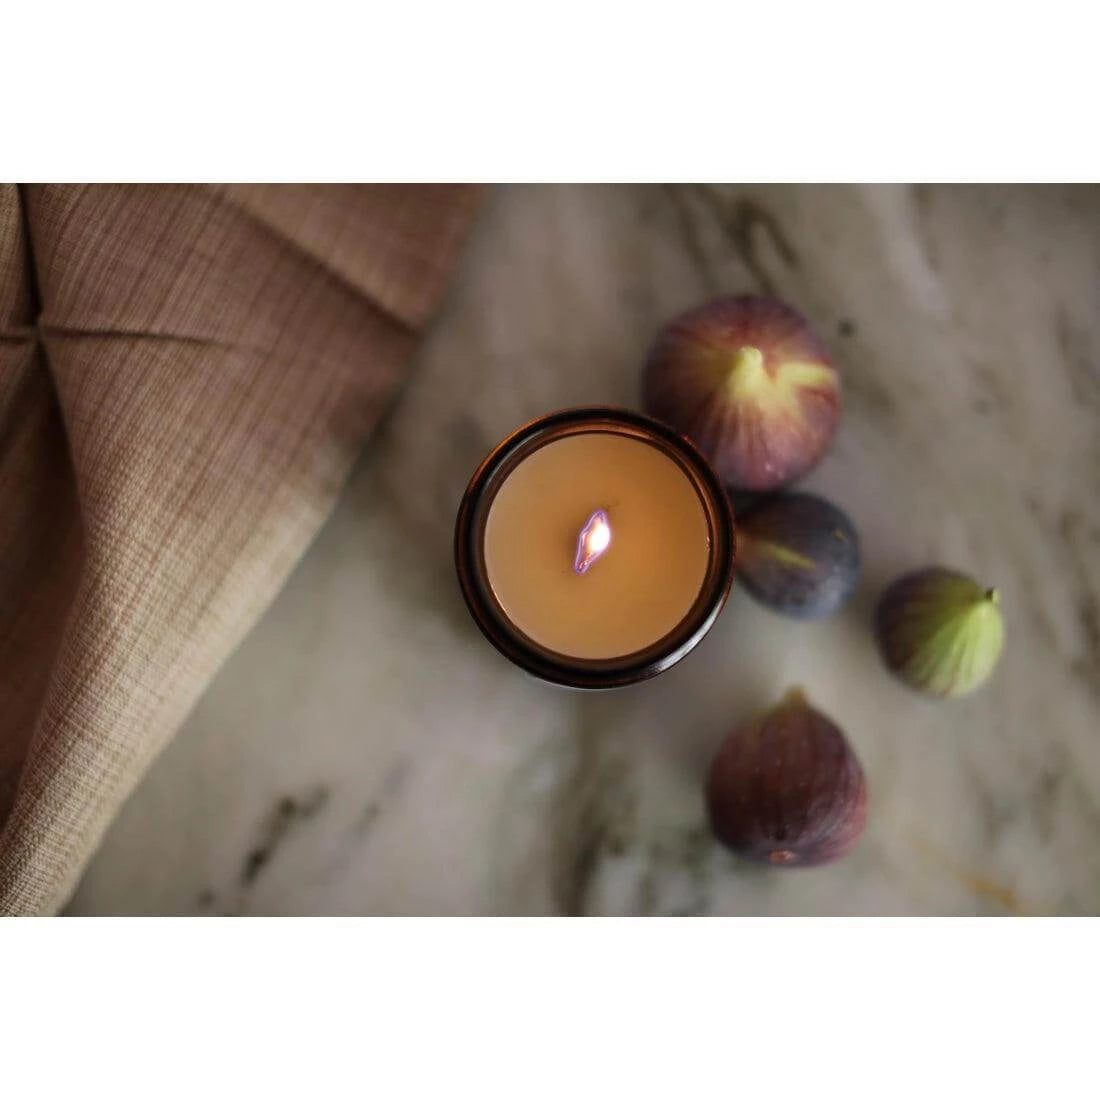 Among the Flowers Candles - Sprig Flower Co